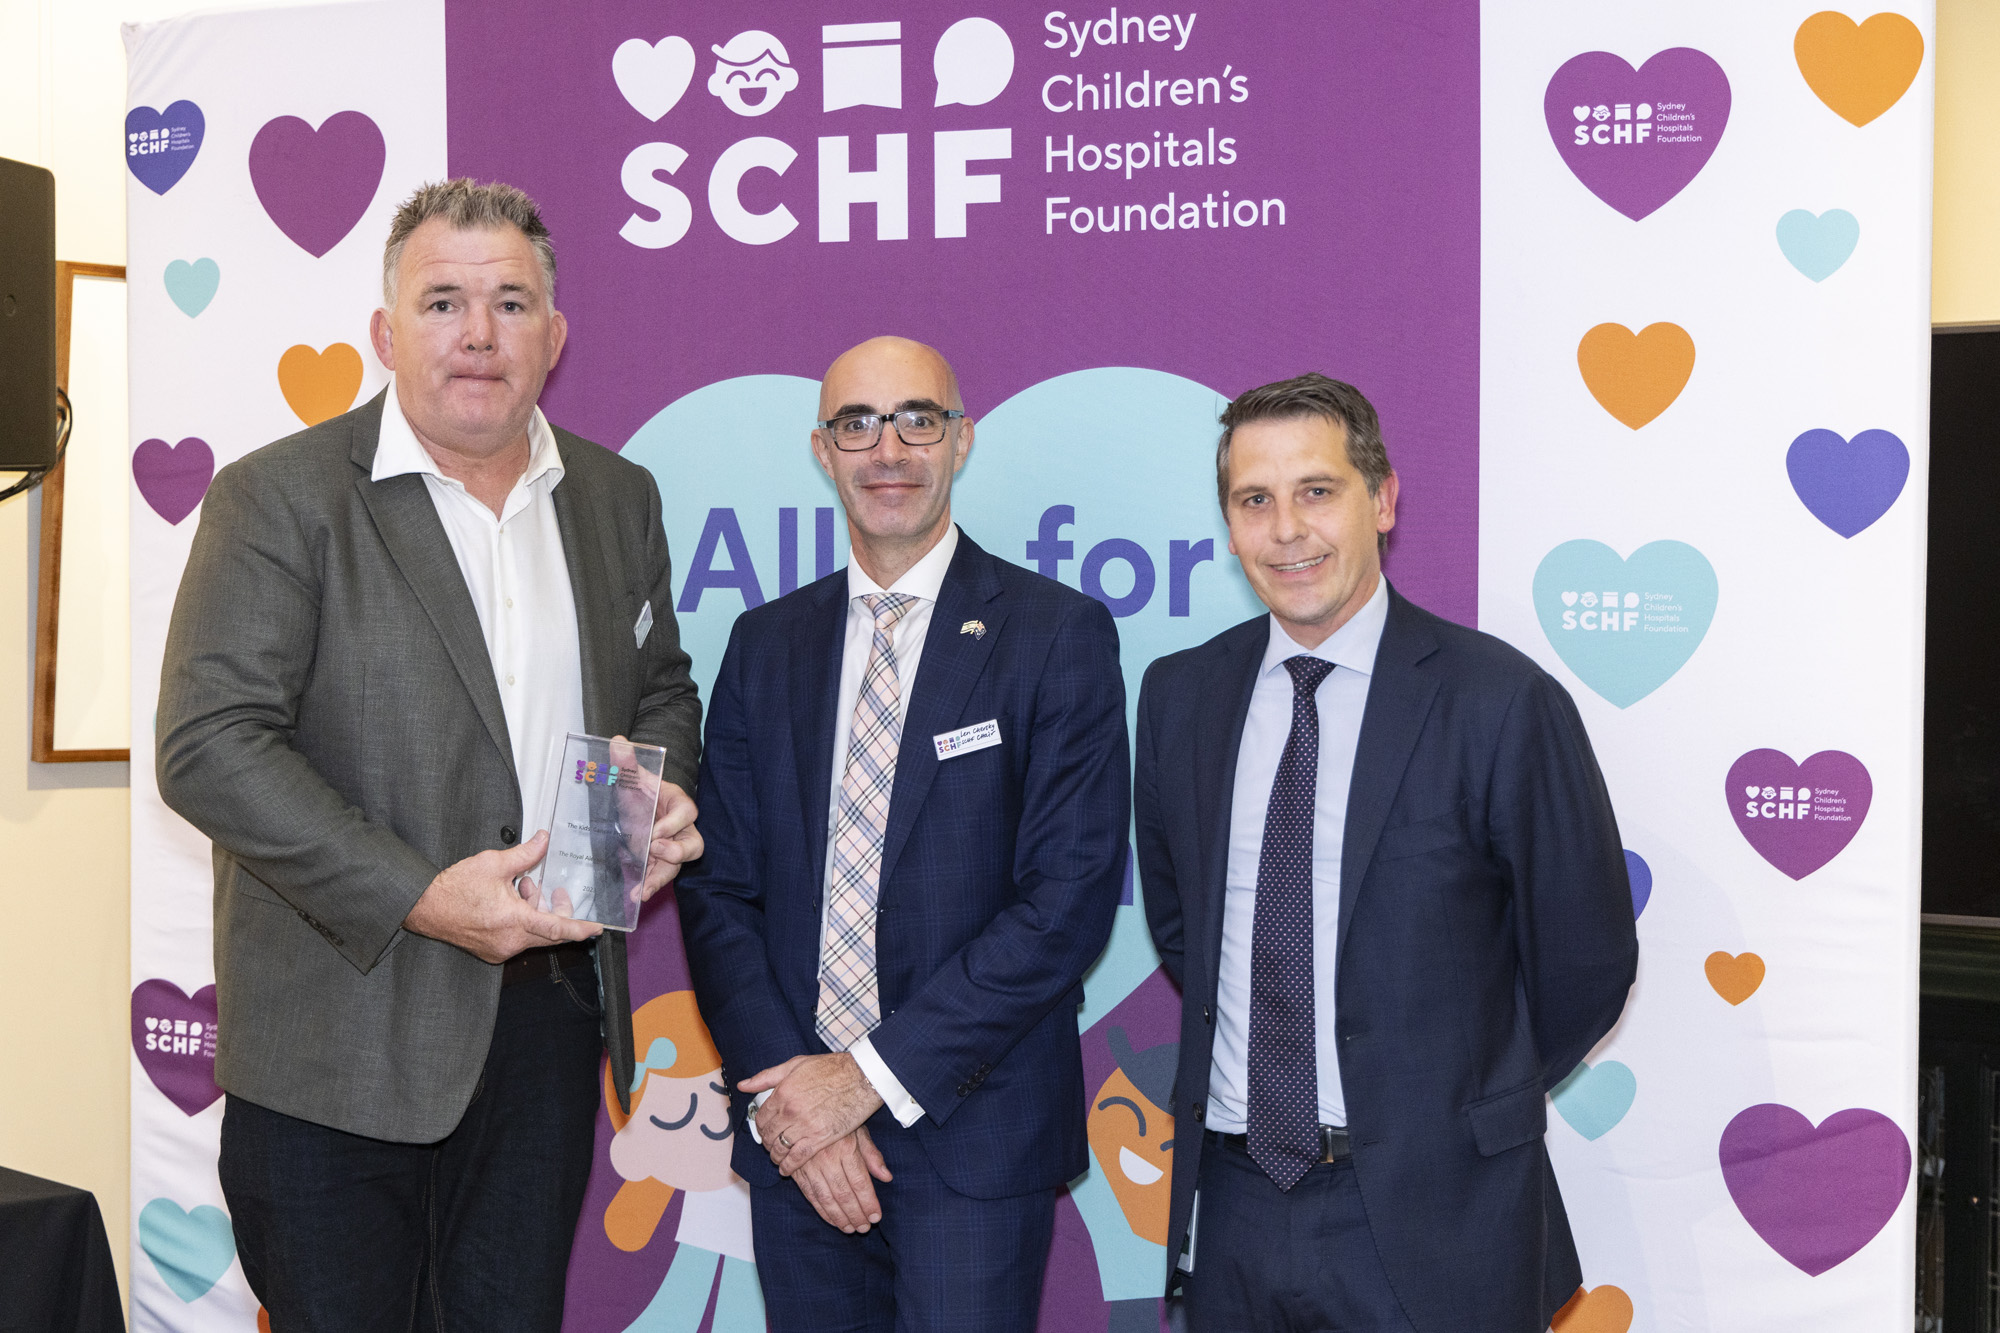 (L-R) CEO Owen Finegan, Sydney Children’s Hospital Foundation Chair Len Chersky and NSW Minister for Health and Medical Research Ryan Park